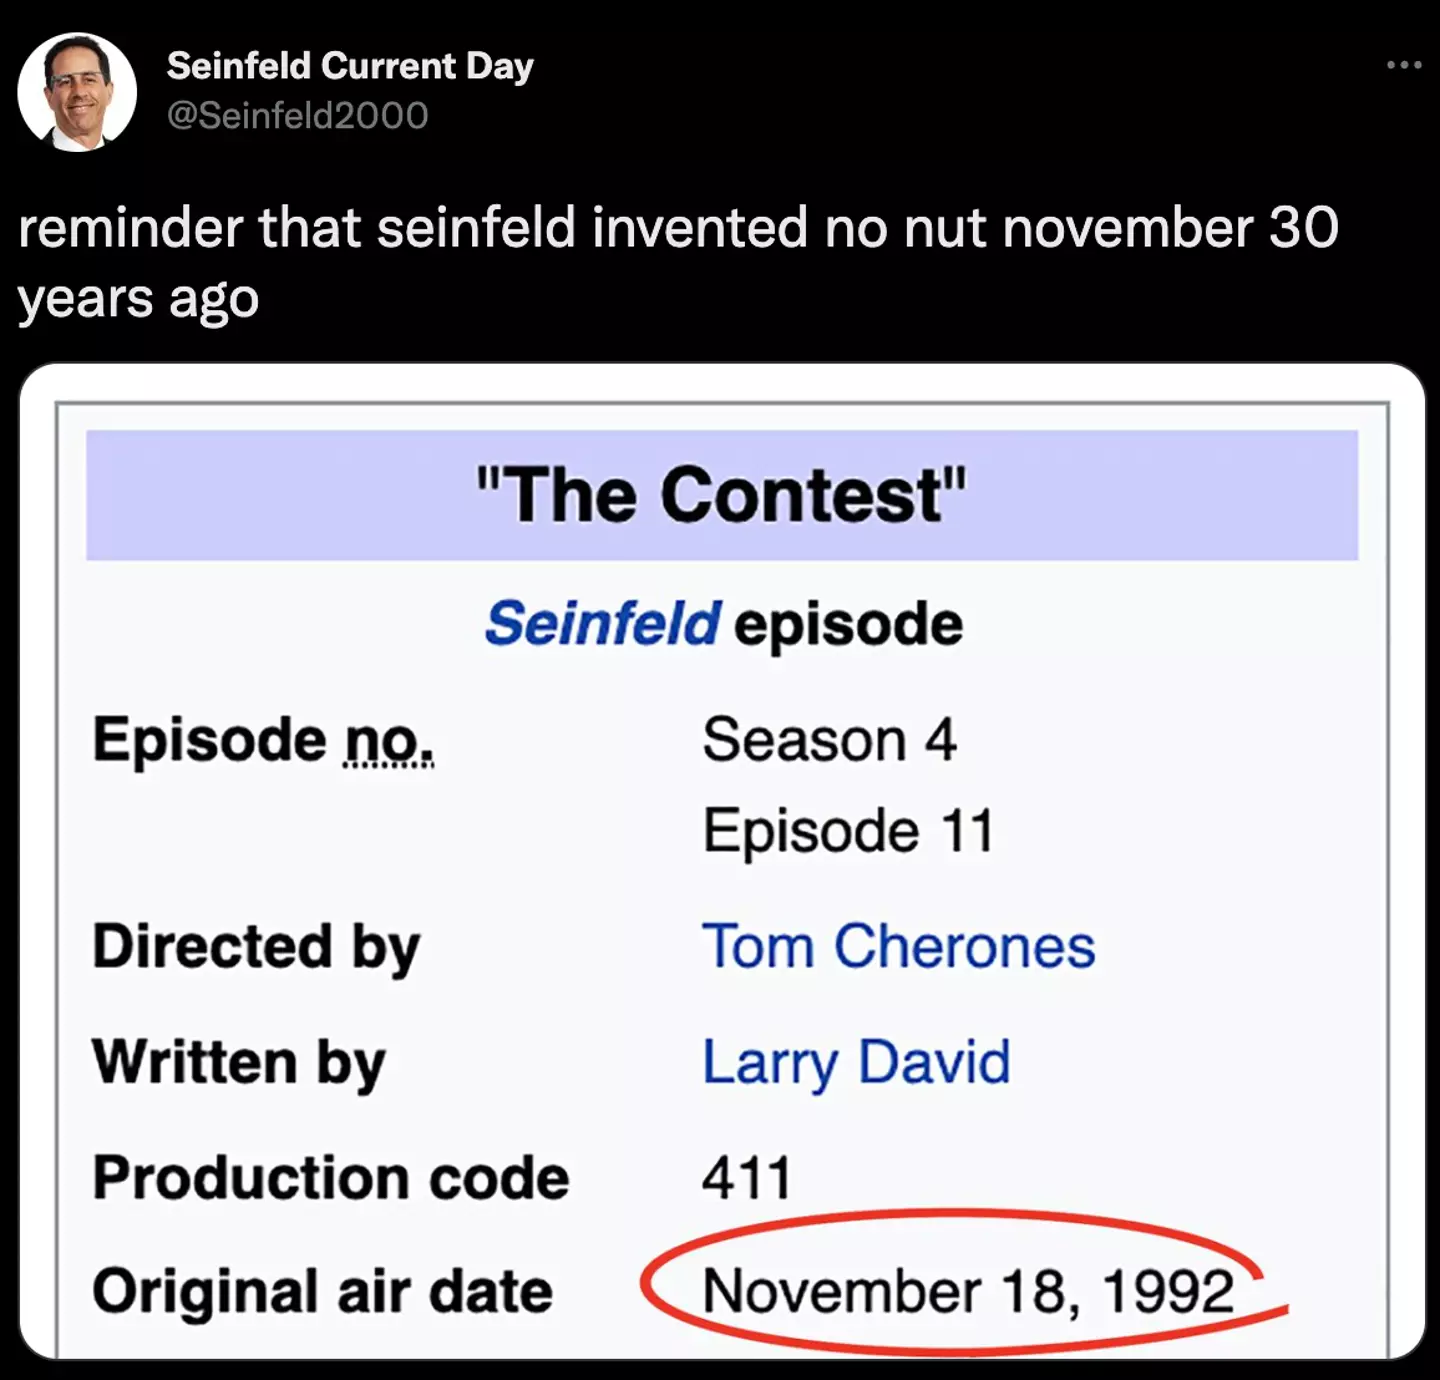 No Nut November (NNN) is the new Movember, and as it turns out, Seinfeld might be behind all the blue-balling.